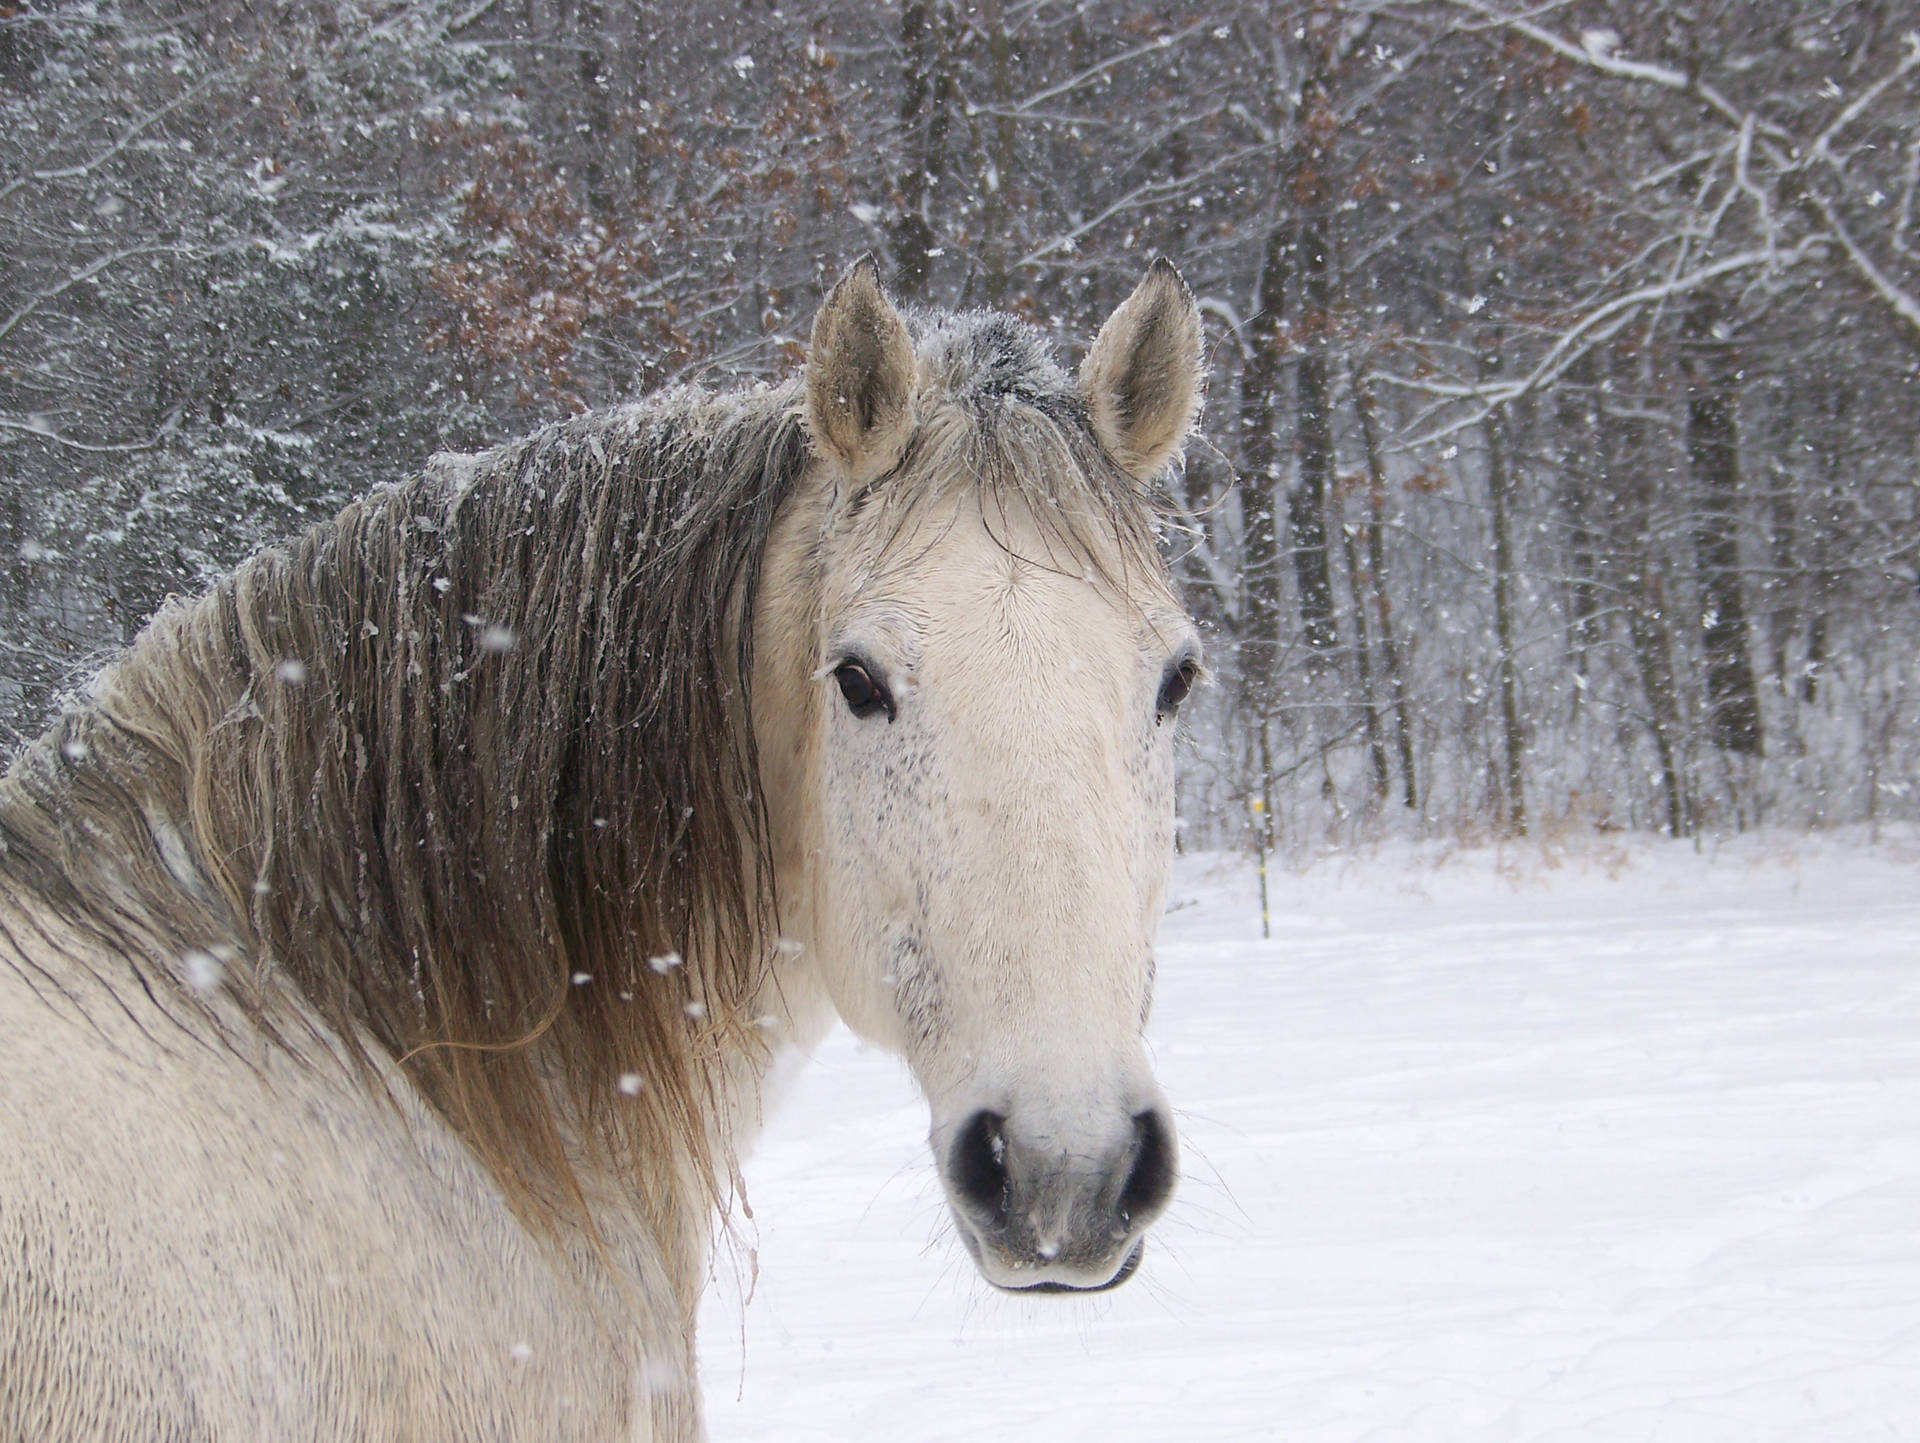 Cute Horse In Snowy Forest Background